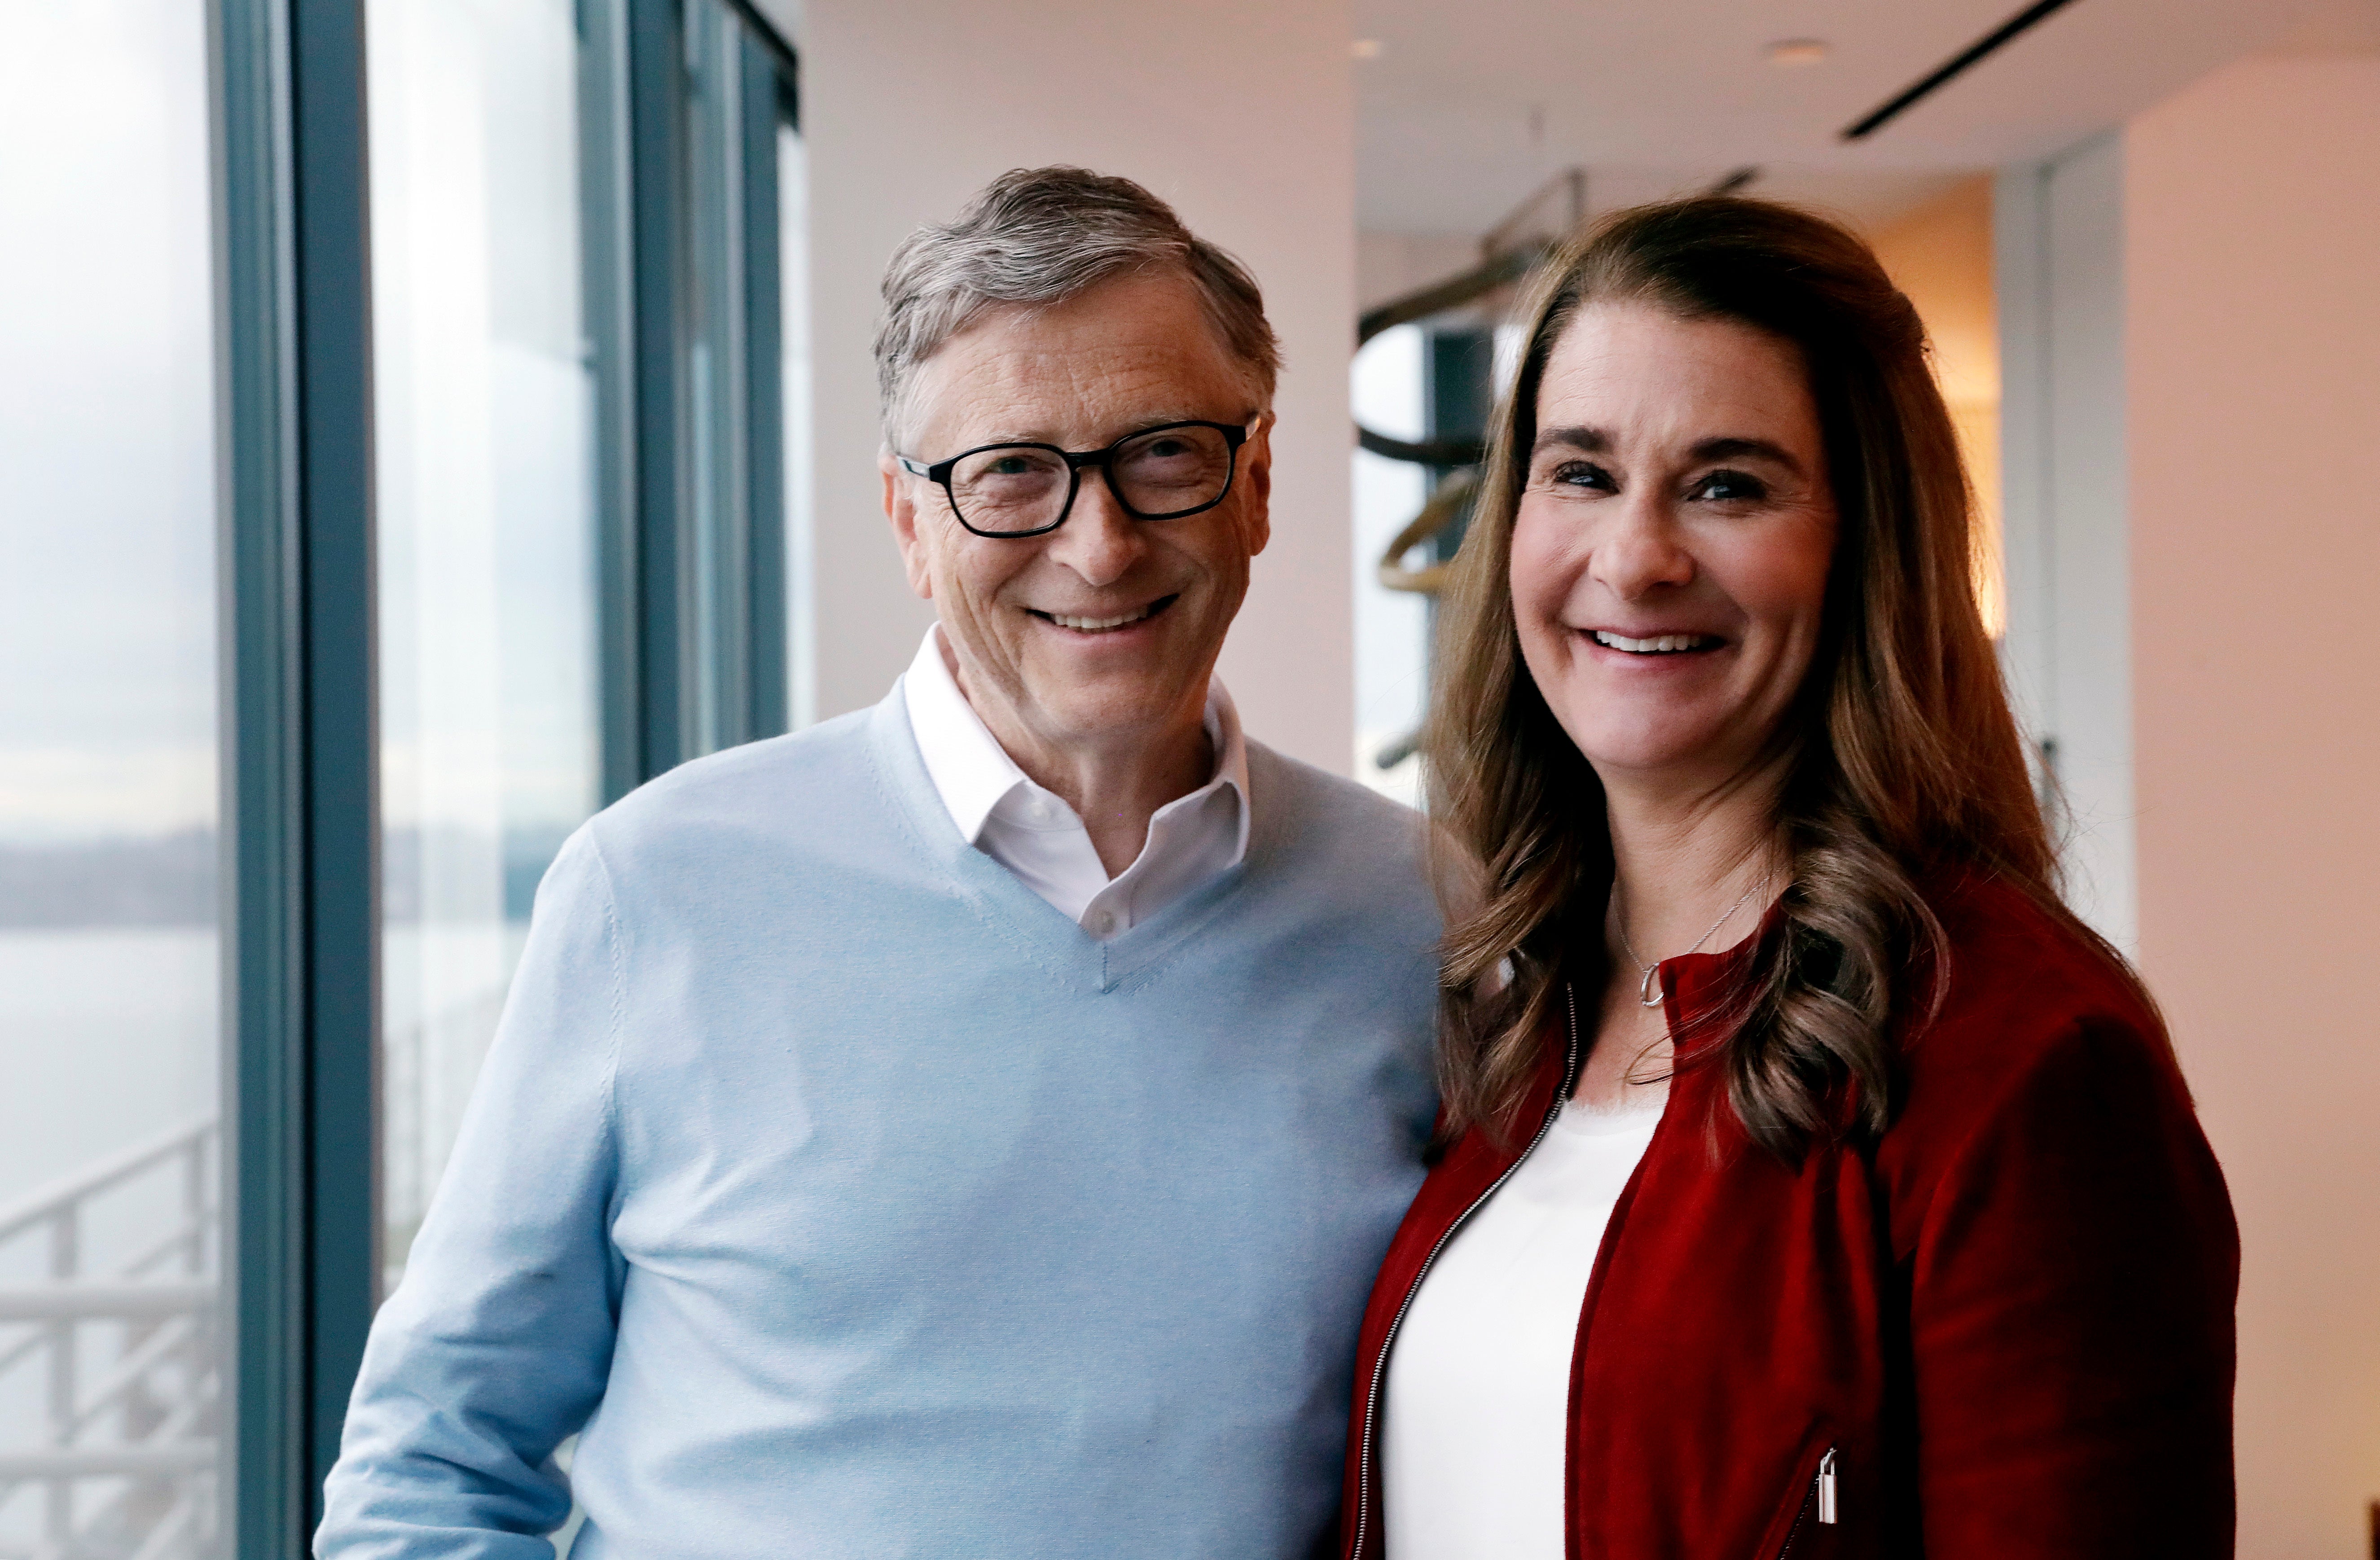 Bill and Melinda Gates pose for a photo in 2019